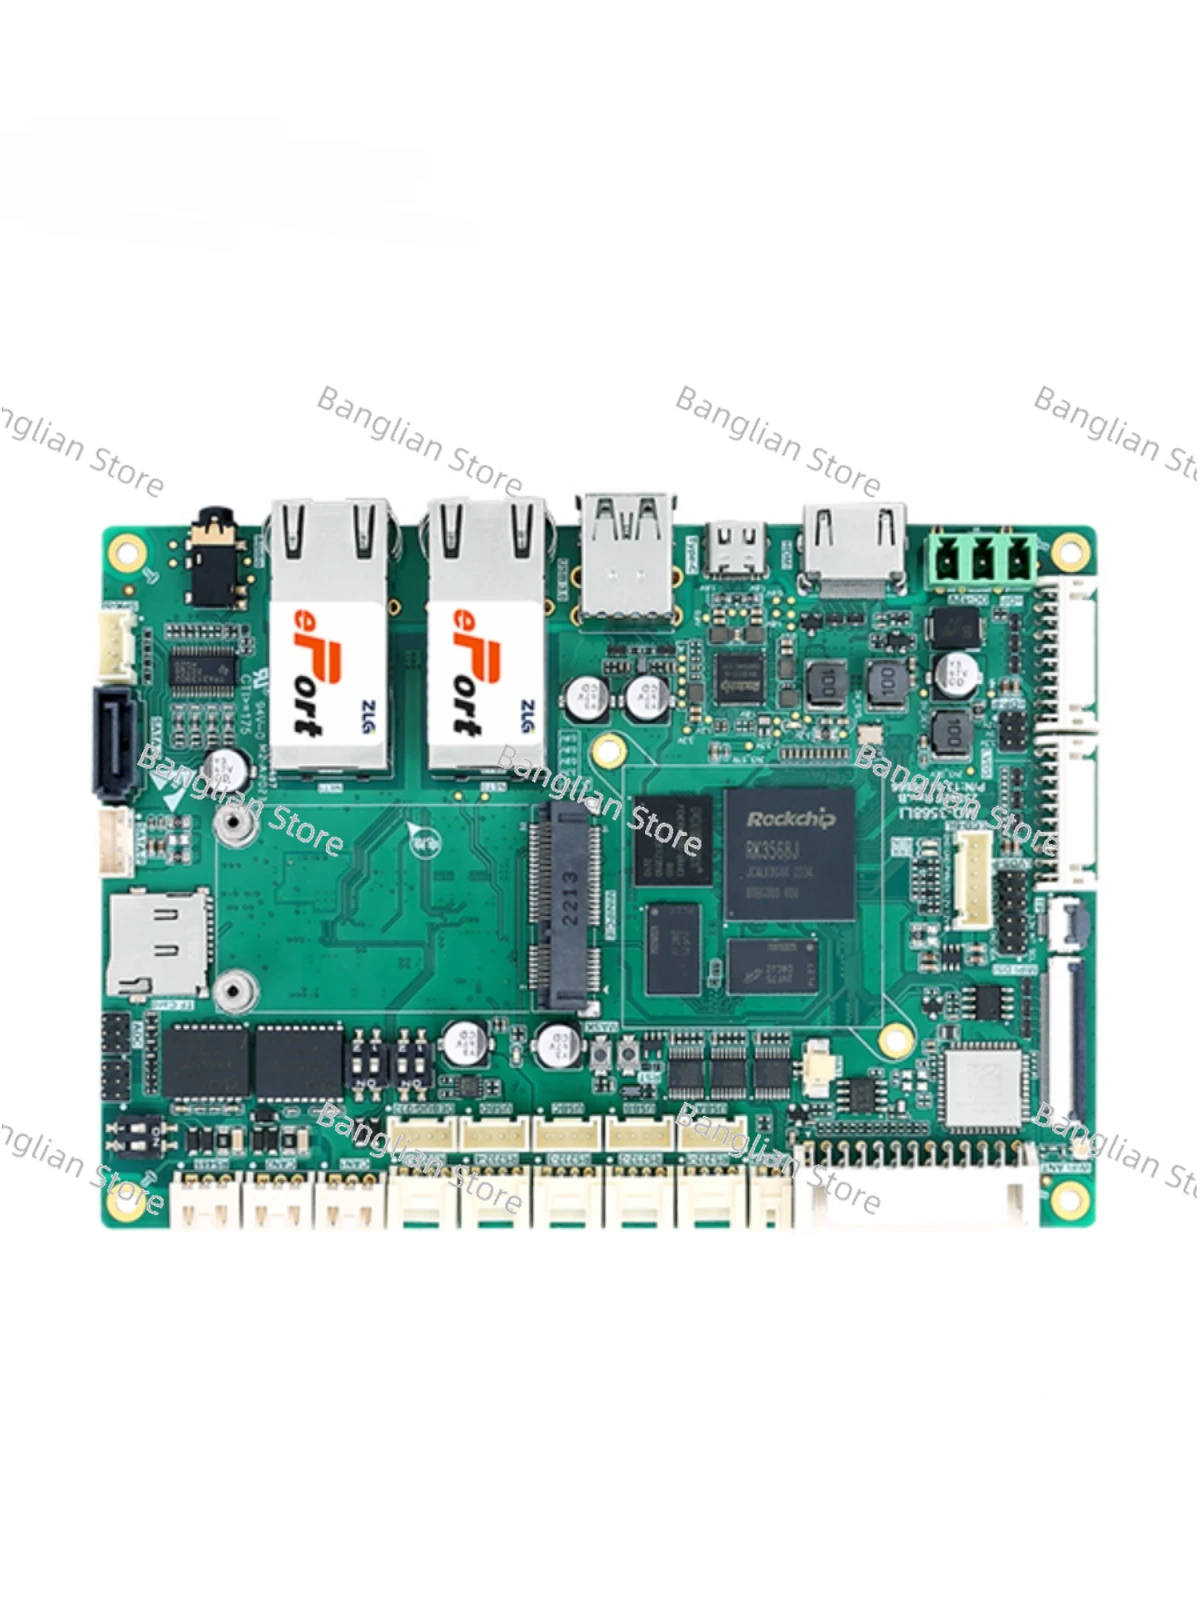 

MD-3568LI4, Industrial Control Motherboard, Suitable for ZLG Zhiyuan Electronic Quad Core Processor Dual Channel